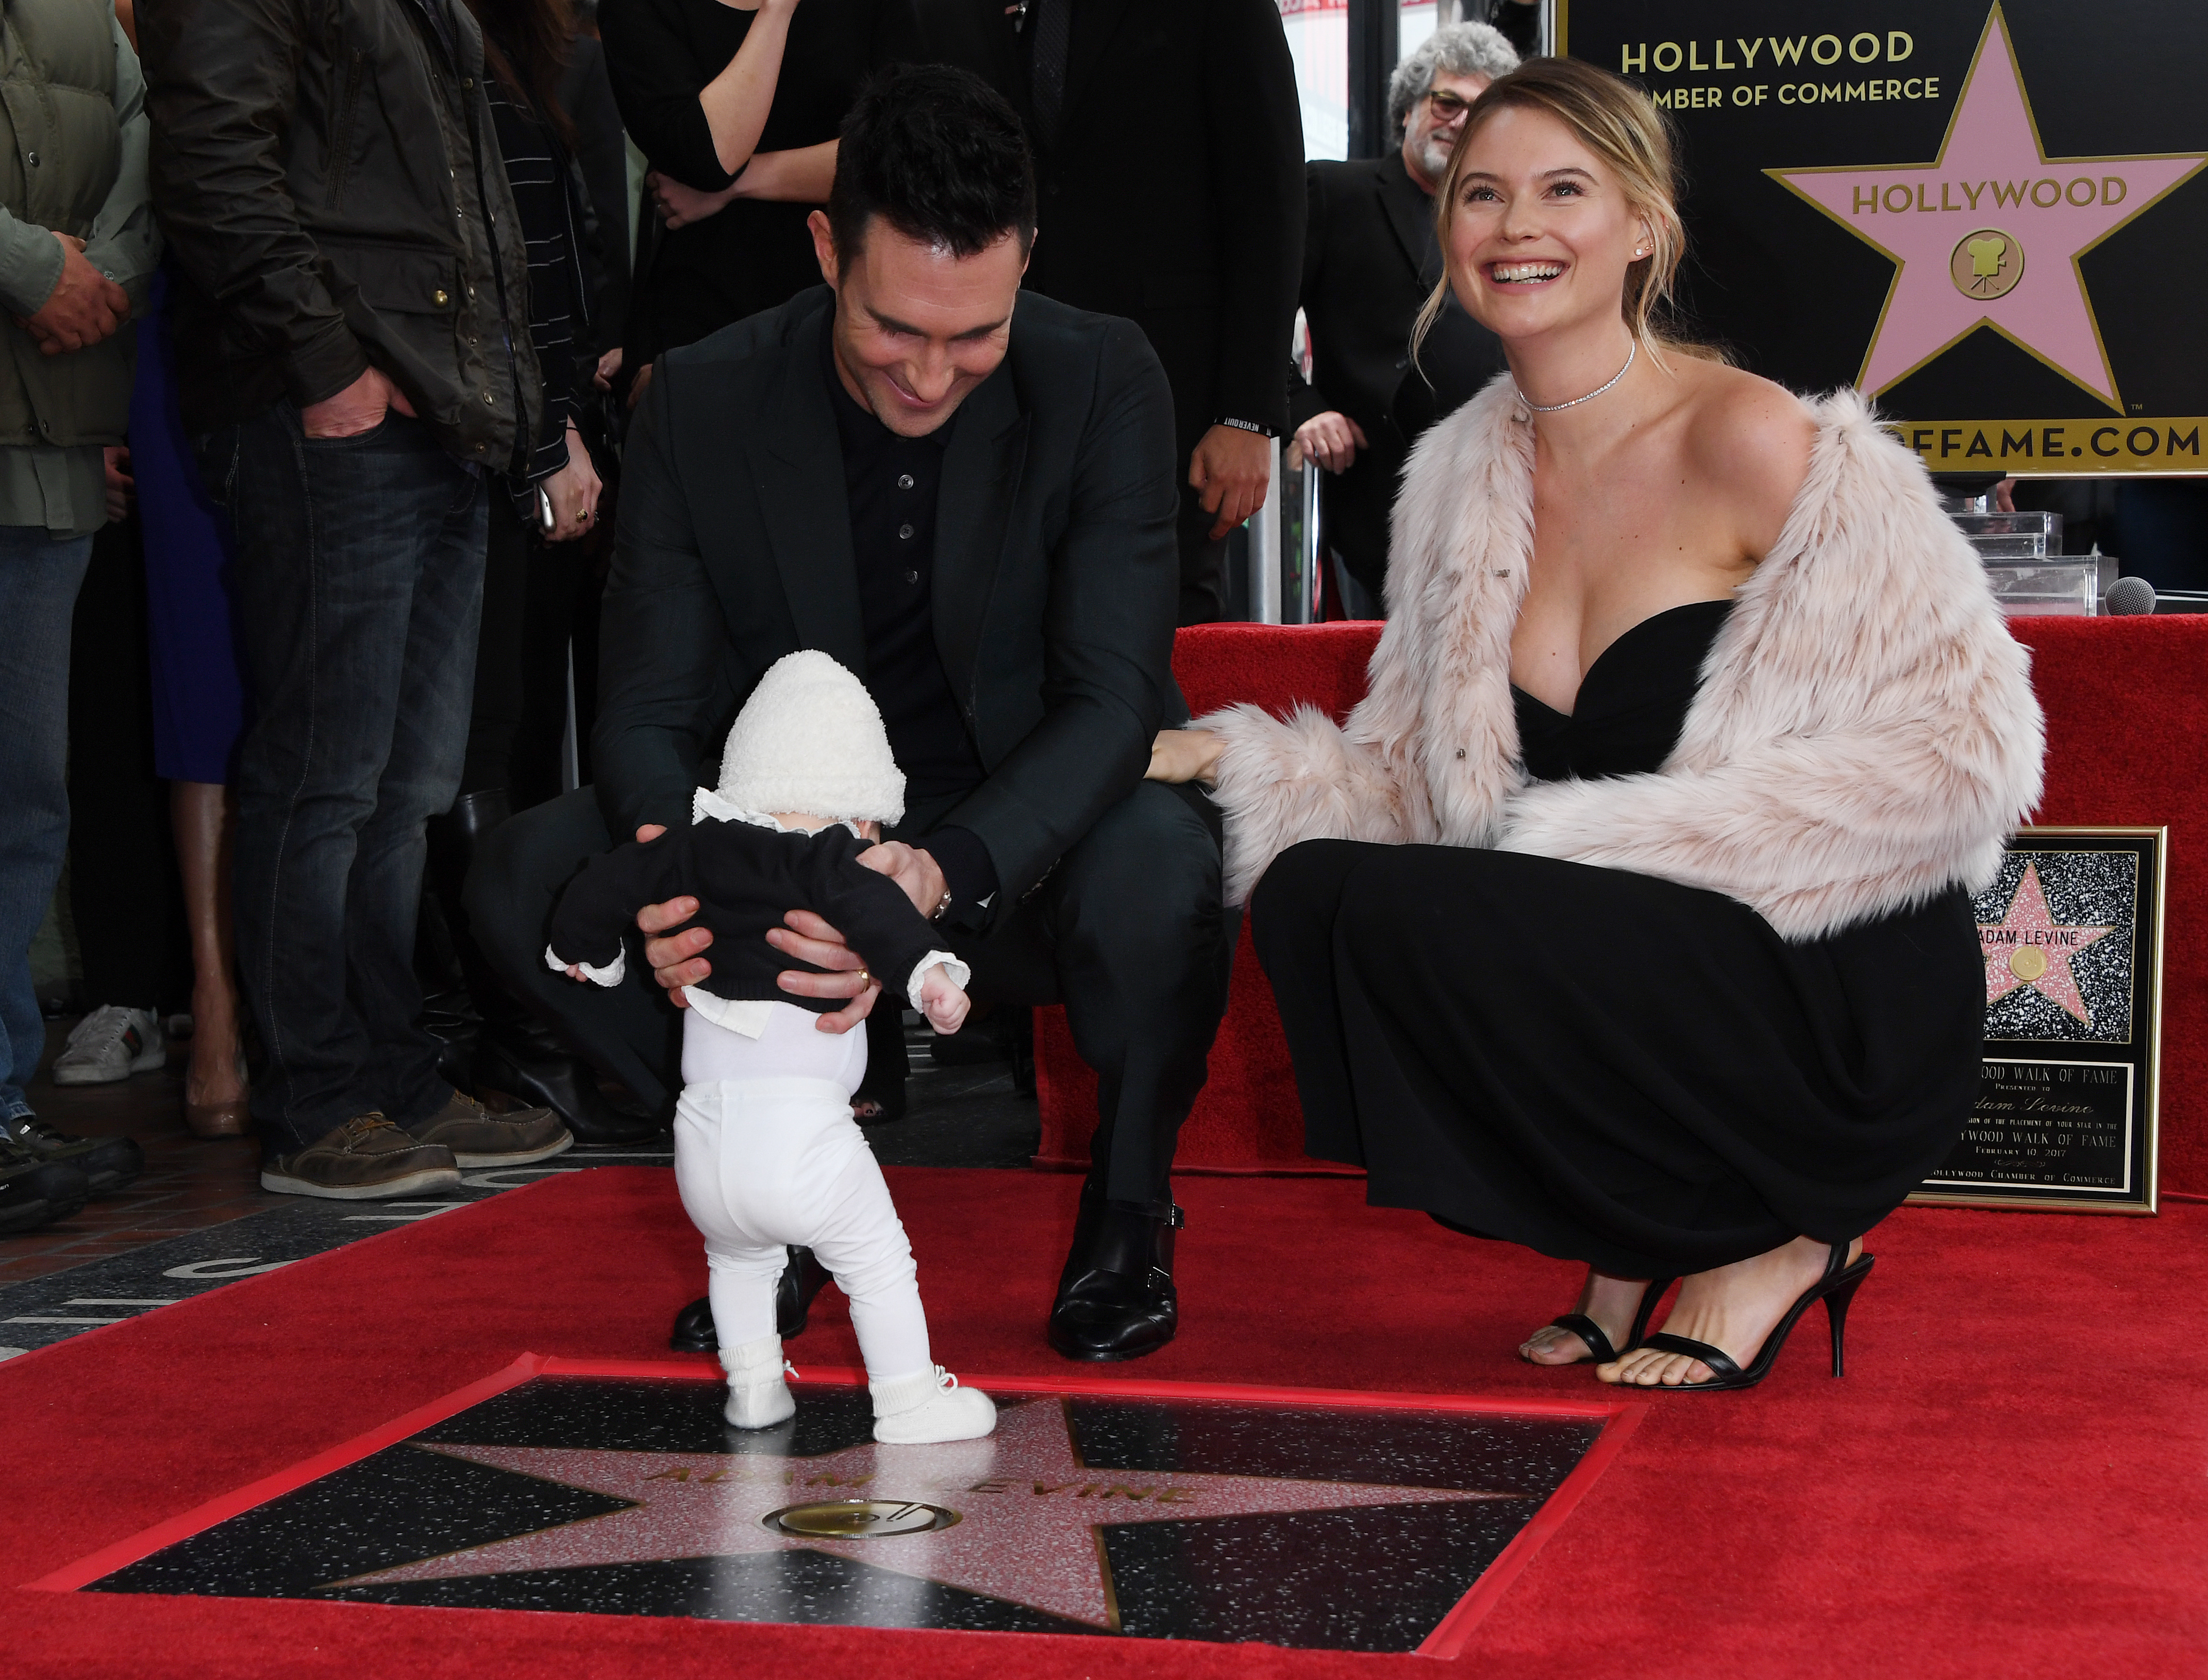 Recording artist Adam Levine (L) with wife model Behati Prinsloo and daughter Dusty Rose pose after he was honored with a Star on the Hollywood Walk of Fame in Hollywood, California, on February 10, 2017. / AFP PHOTO / Mark RALSTON